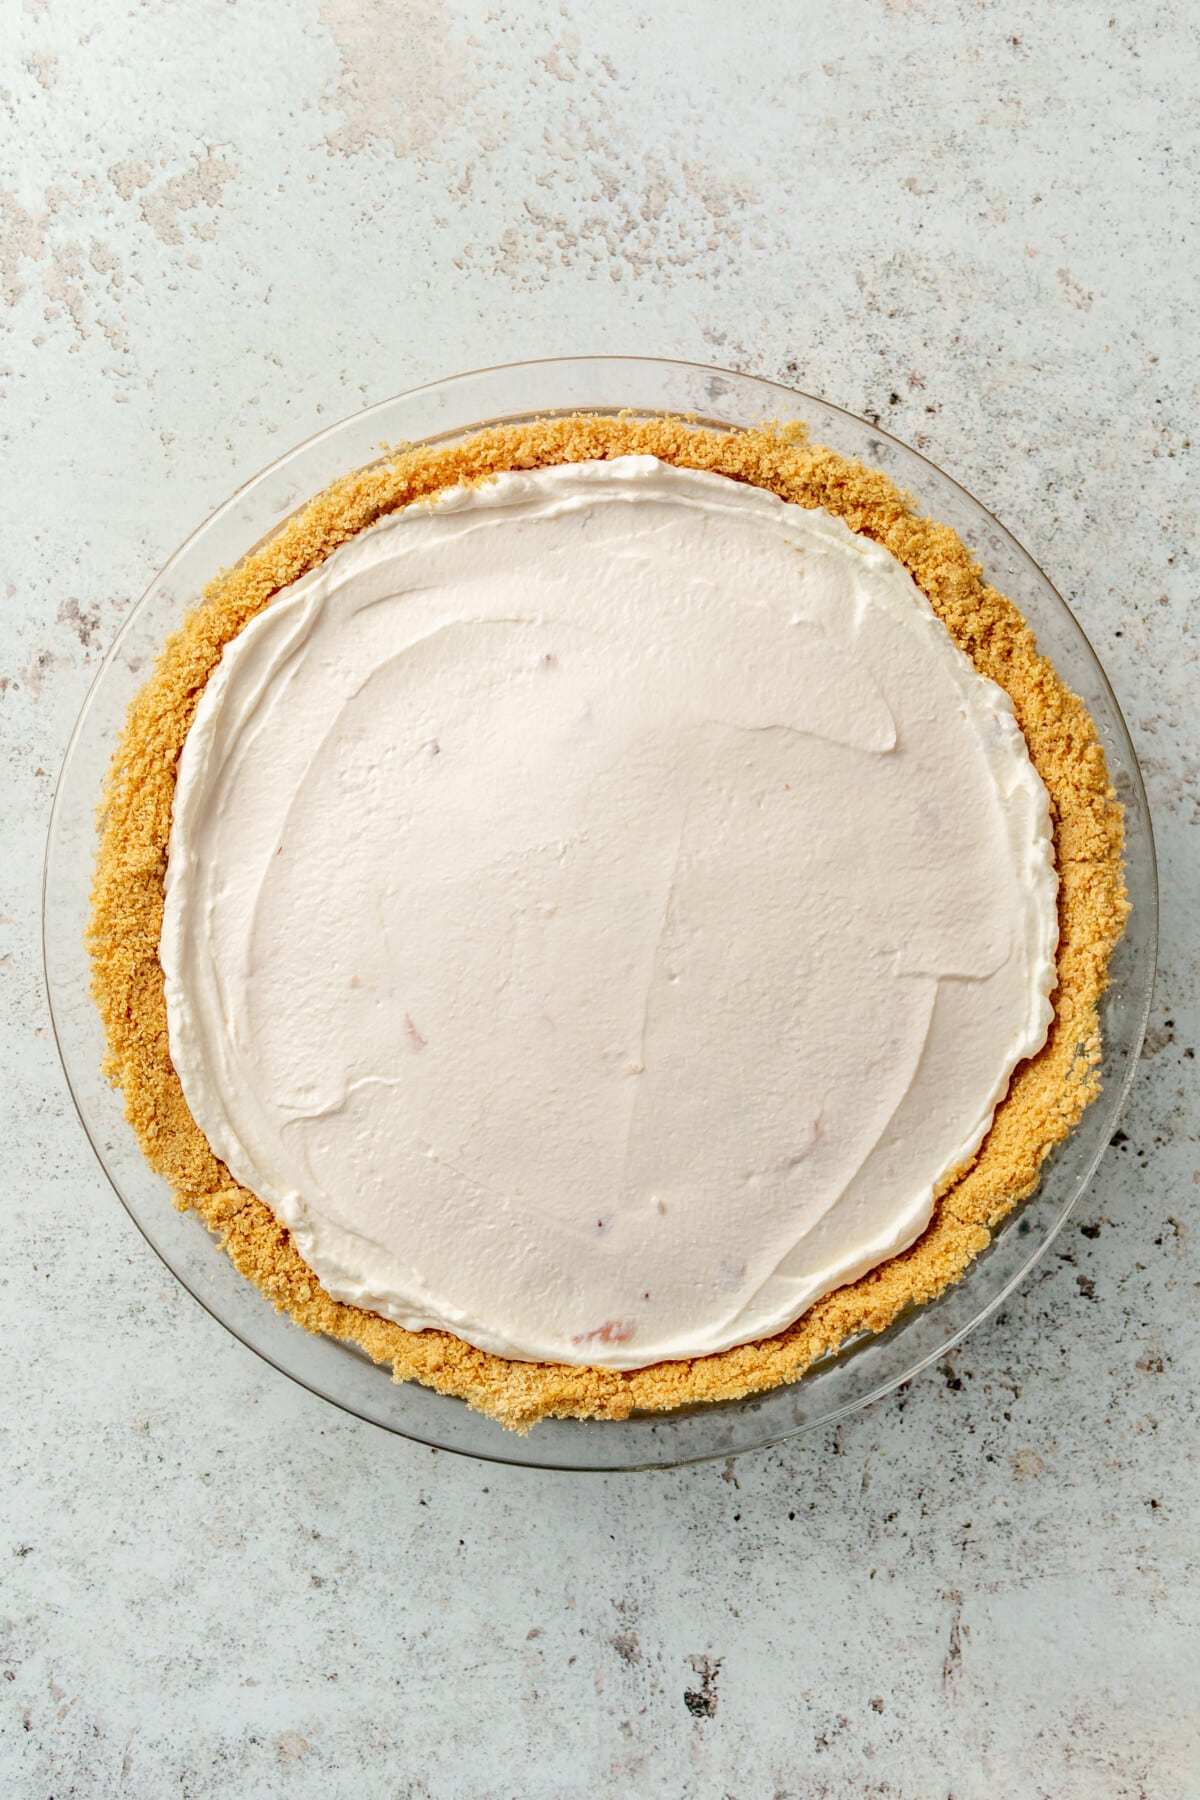 The yogurt mixture has been placed inside of the pie dish with the graham cracker crust. It has been smoothed out to fill the whole dish evenly.